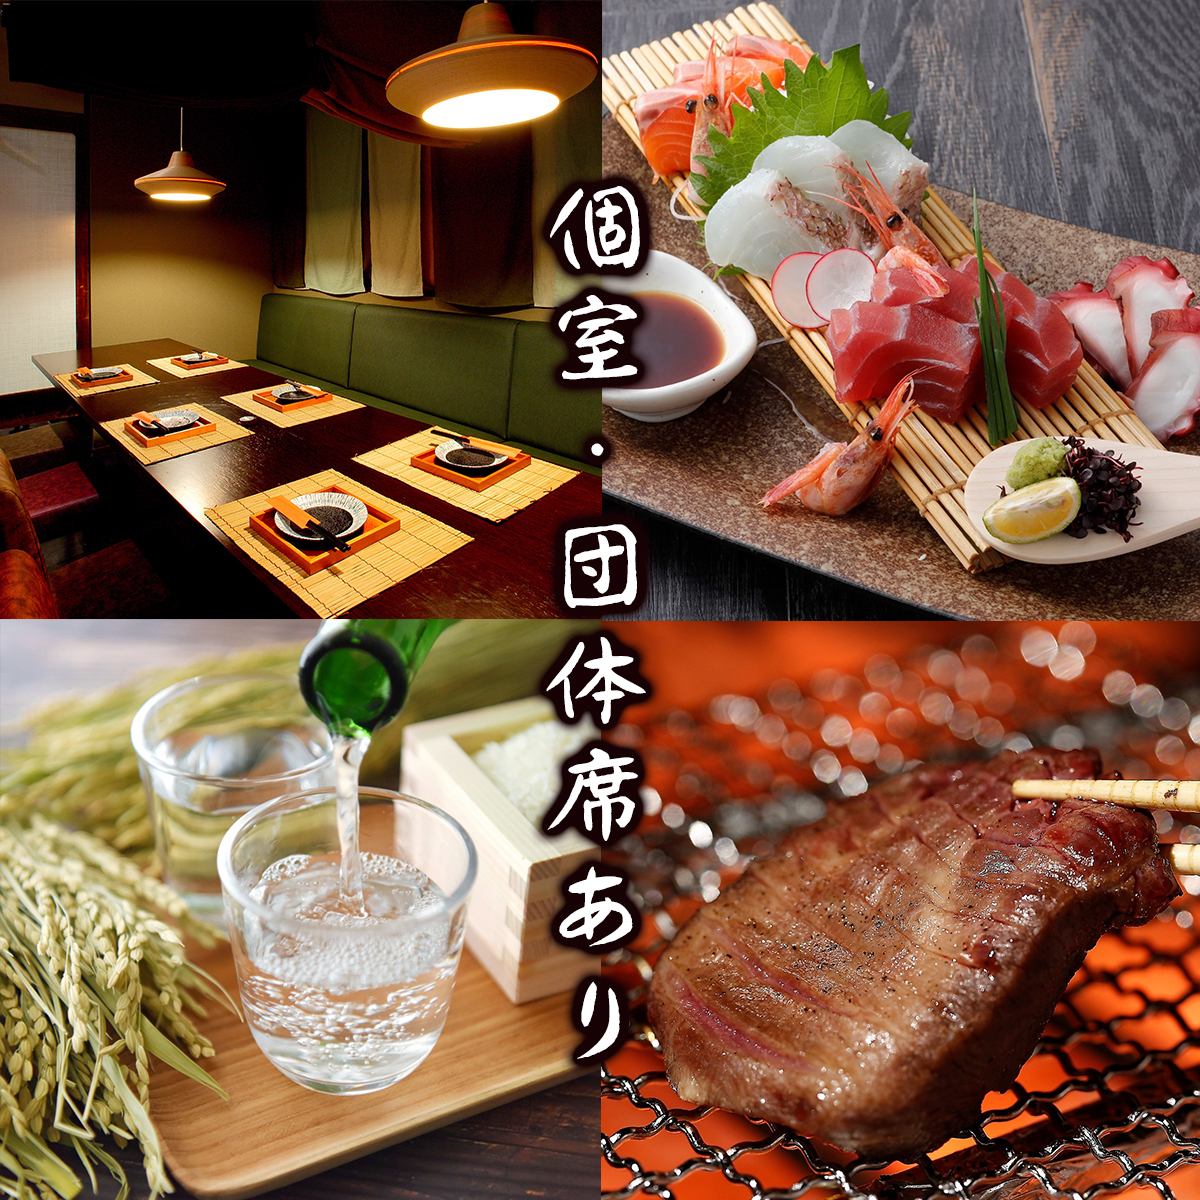 3 minutes from Sendai Station (Private rooms and group seating available) Seri hot pot, beef tongue, oysters, seafood, yakitori, and plenty of alcohol!